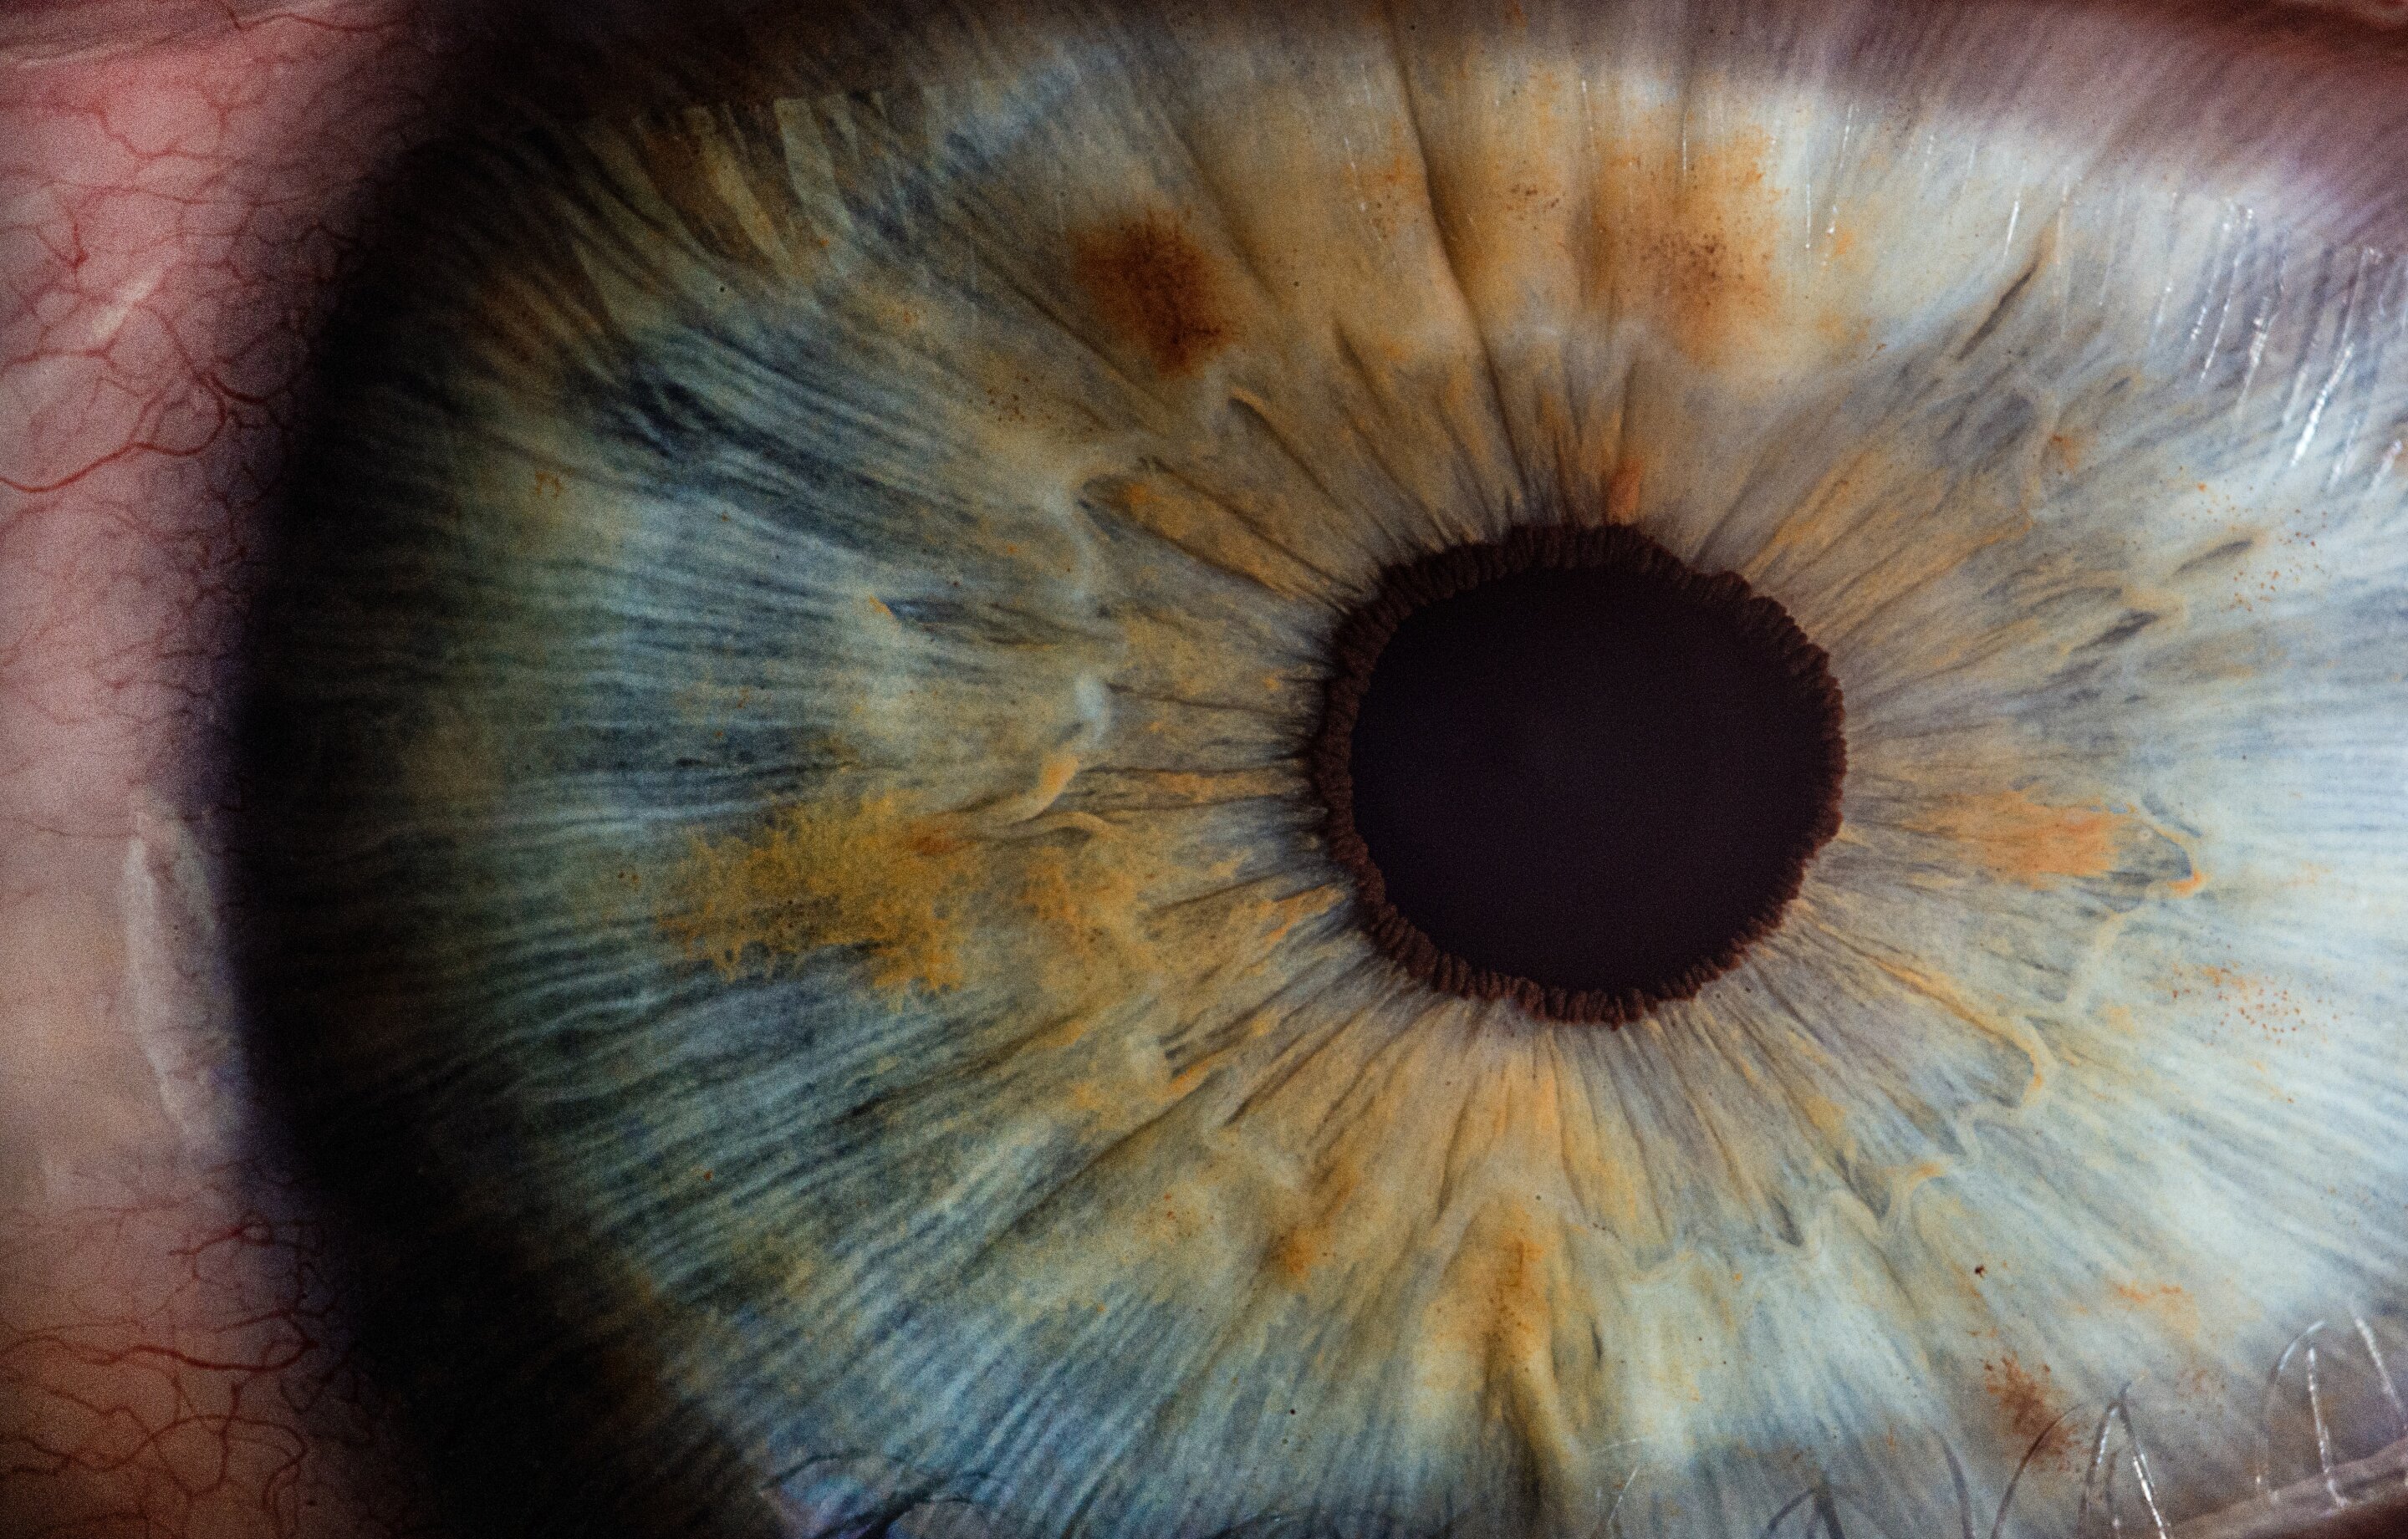 #Eye movements hold clues to how we make decisions